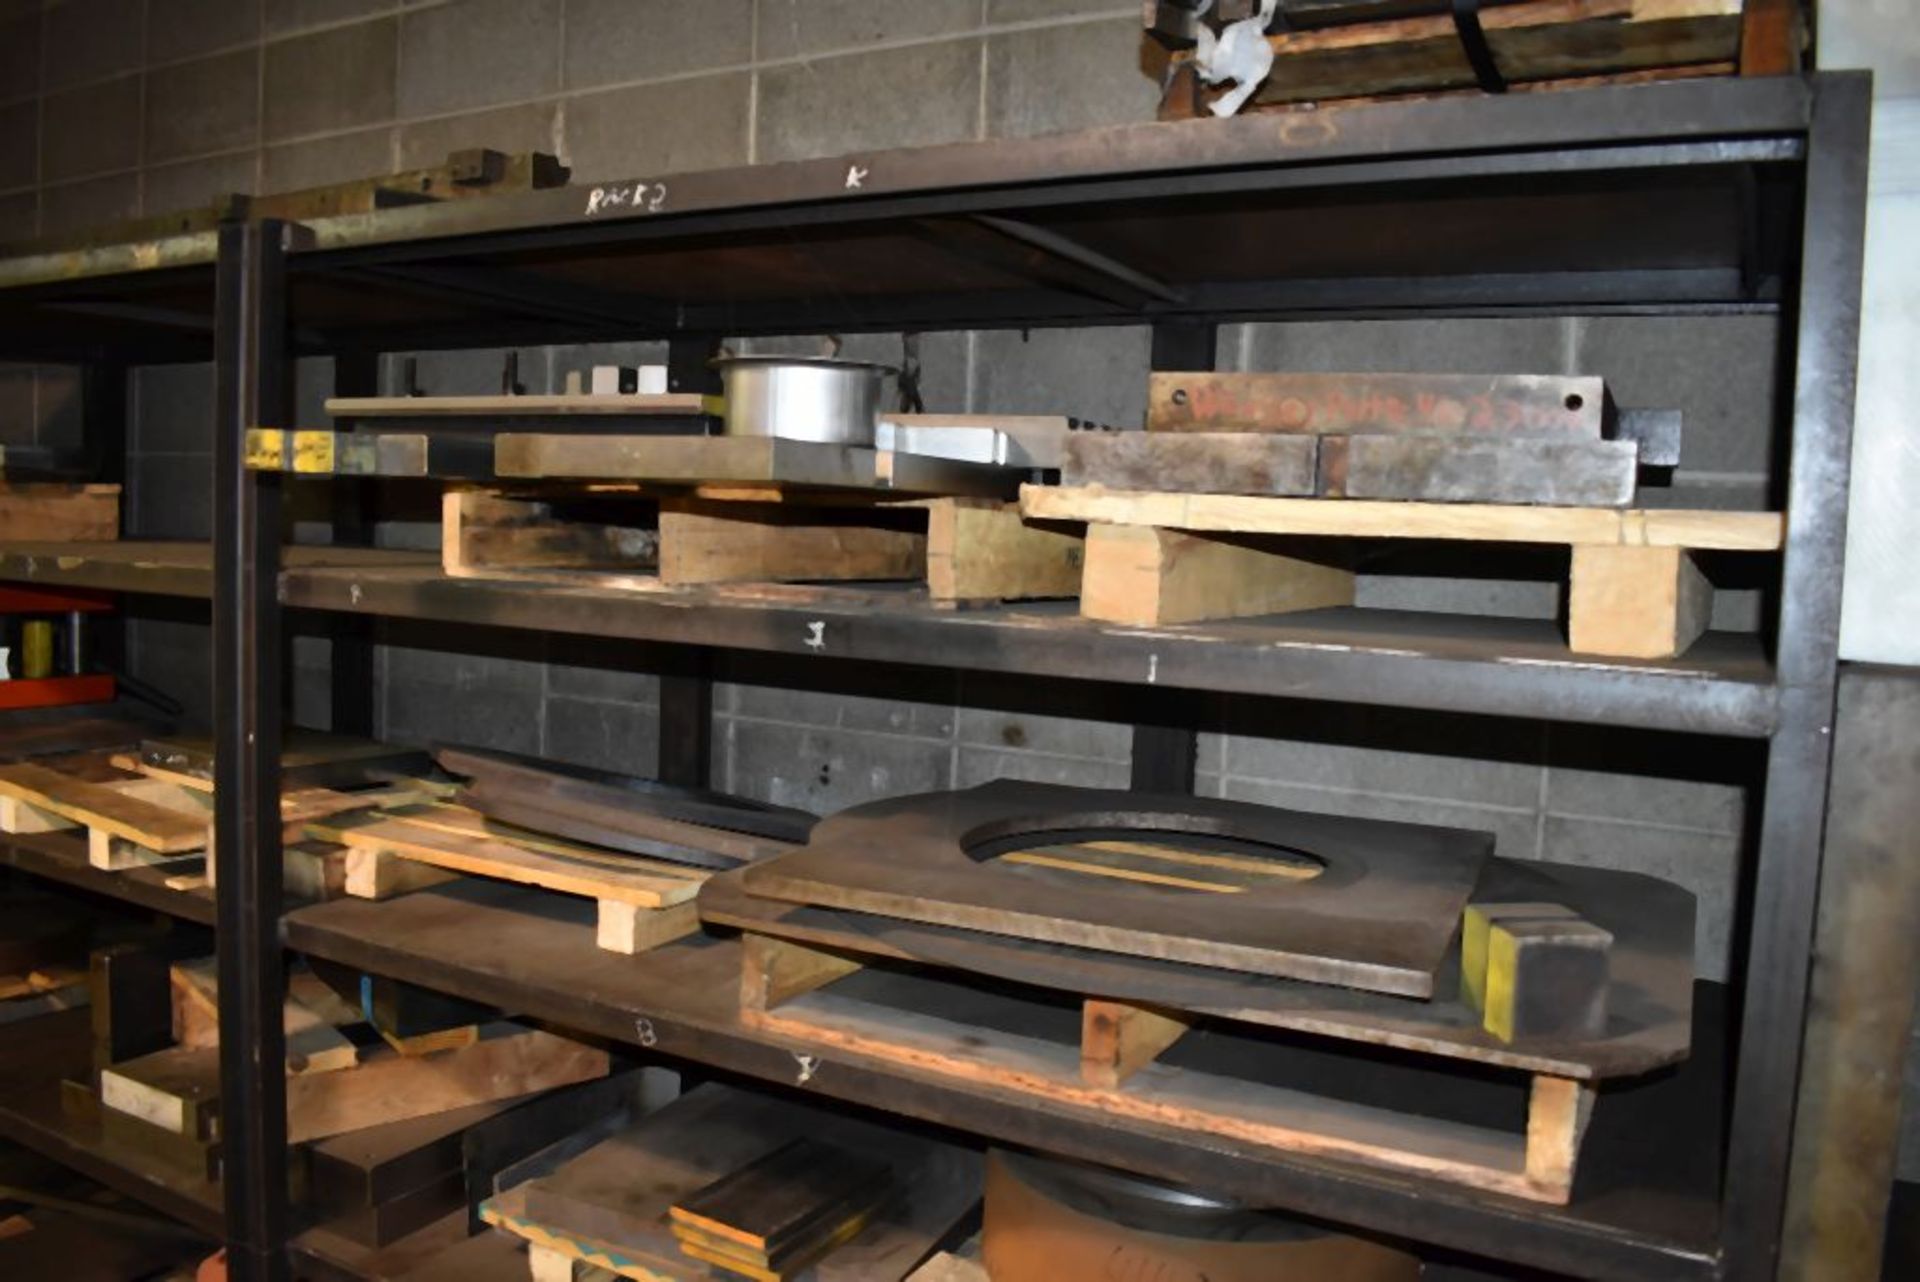 HEAVY DUTY STEEL SHELVING UNIT WITH CONTENTS, 10'2"L x 30"D x 90"H - Image 4 of 7